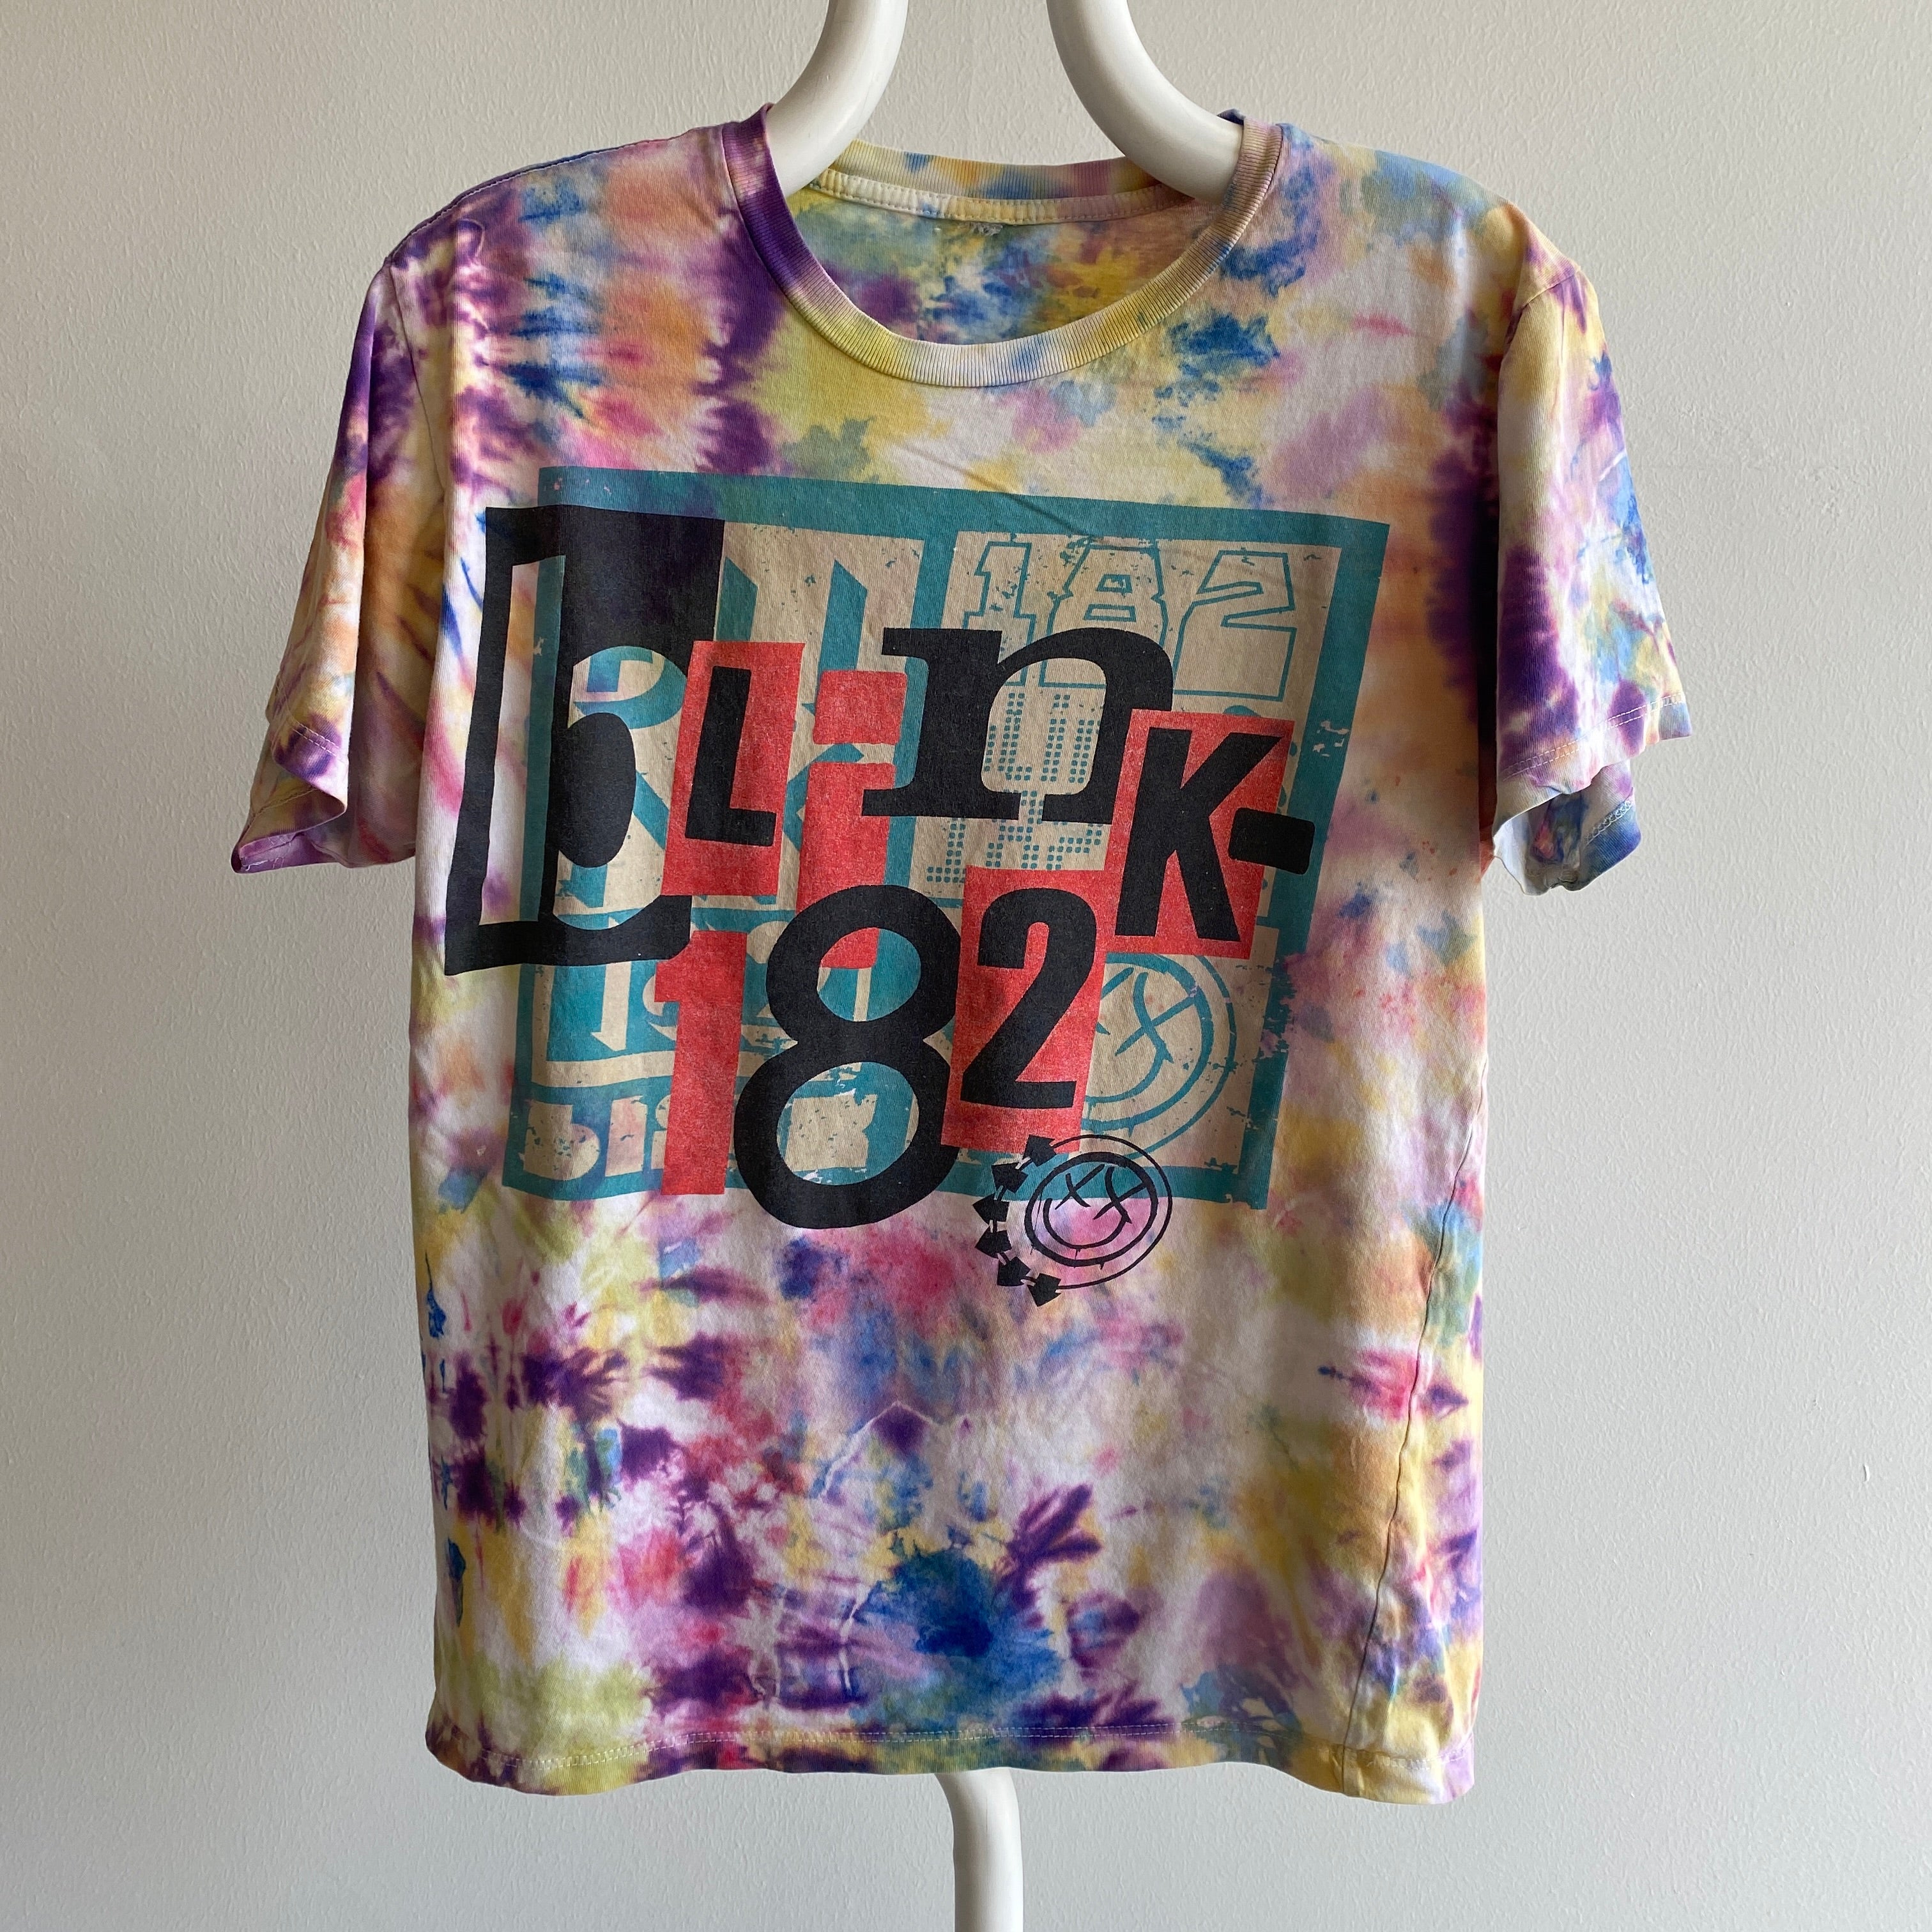 2000s Blink 182 Not Vintage, But Worn Like One, Tie Dyed T-Shirt